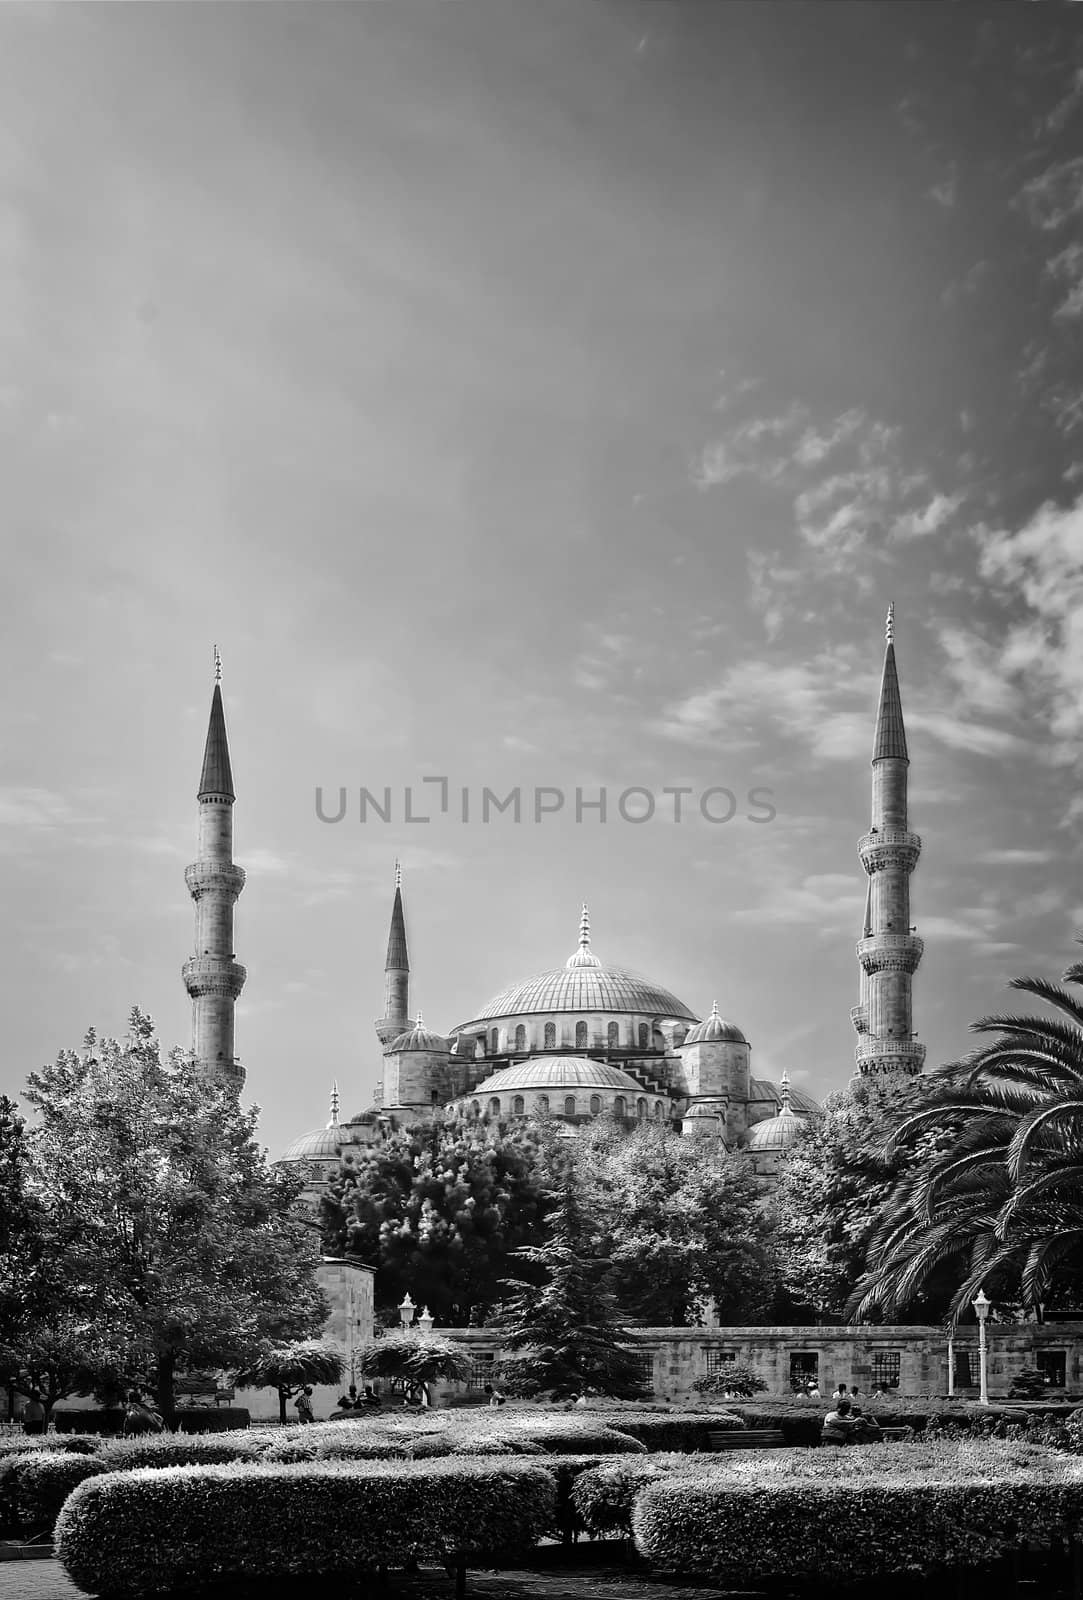 The Blue Mosque or Sultan Ahmed Mosque in Istanbul, Turkey in black and white 